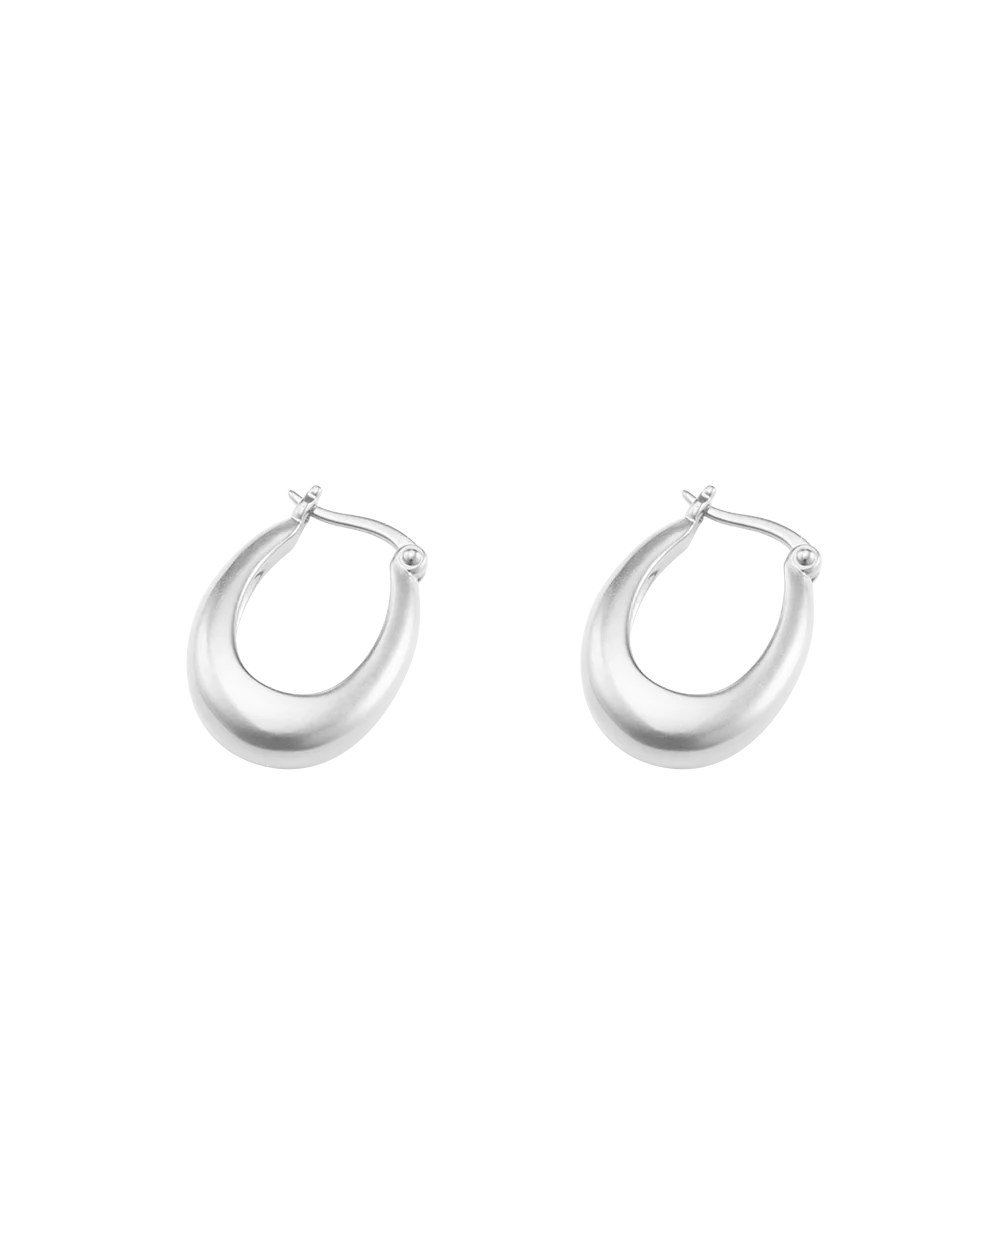 Centra Hoops STERLING SILVER